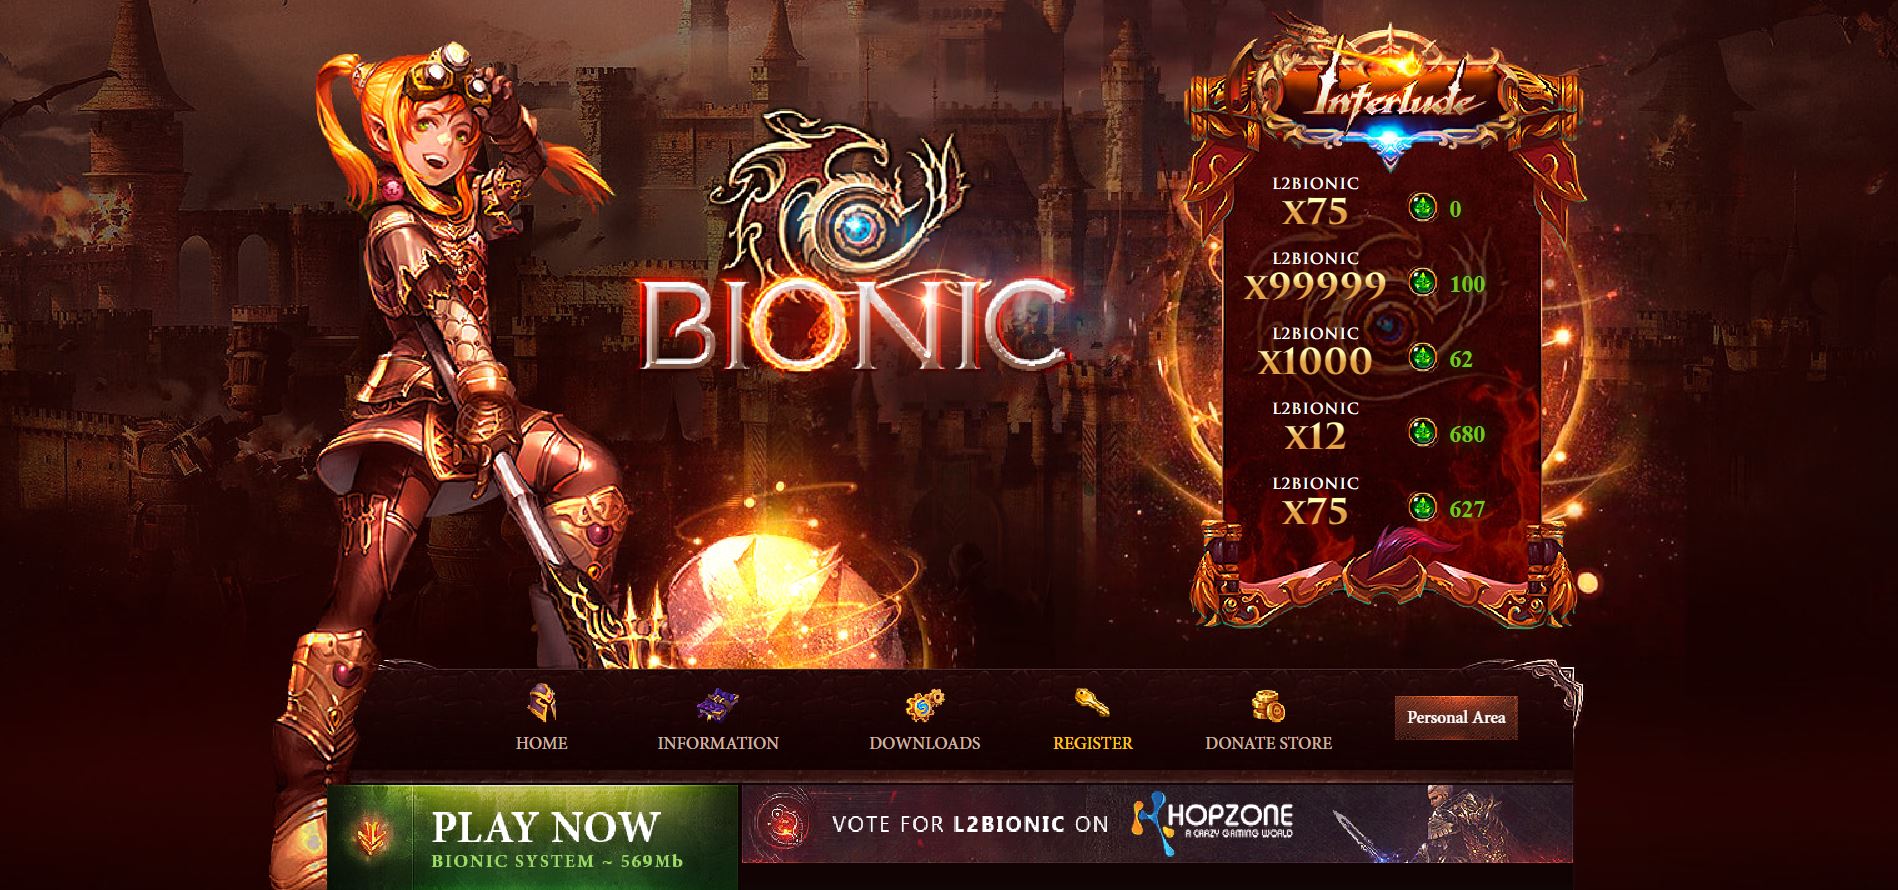 ⚡️ Revive the Era of Battles! Lineage 2 Interlude x1000 on L2Bionic: Restore Energy to Epic Clashes! ⚔️🔥